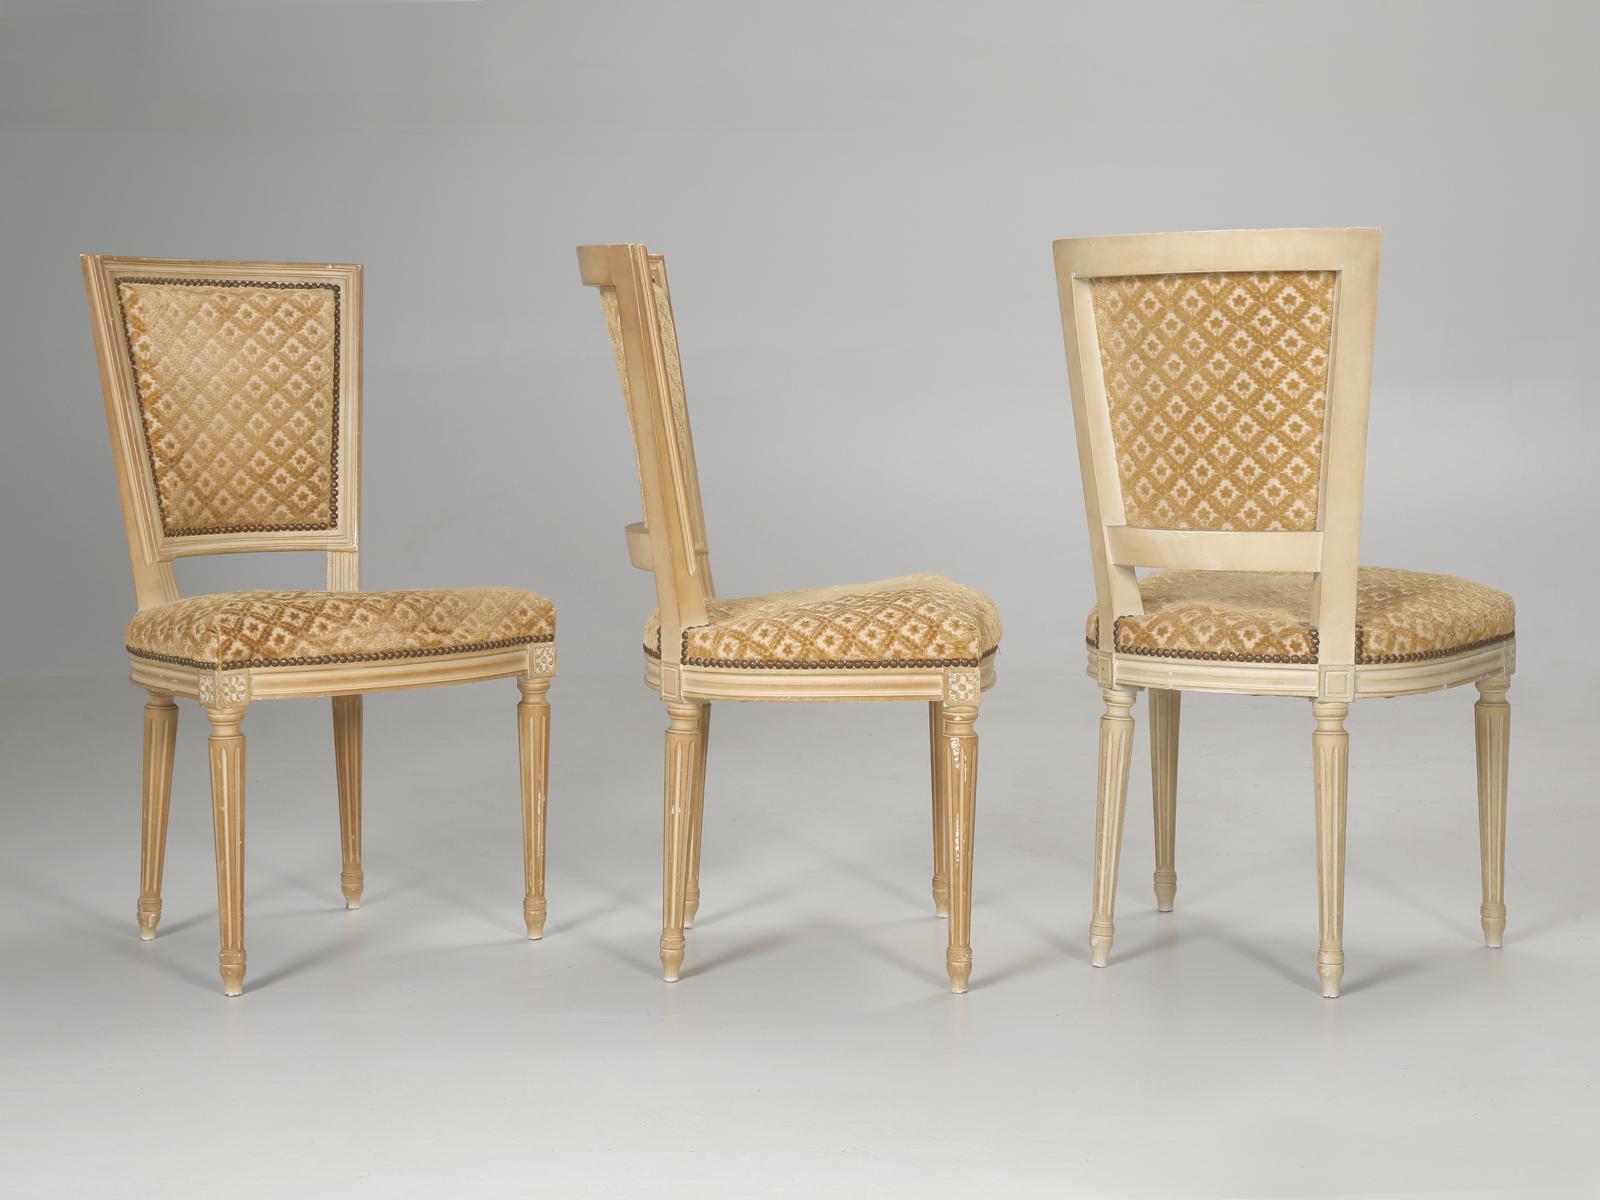 Vintage set of (6) French Louis XVI dining chairs in absolutely all original condition, which means they will require a trip to your favorite upholstery shop. The nice part is that no one played around with the paint, so the patina is still intact.